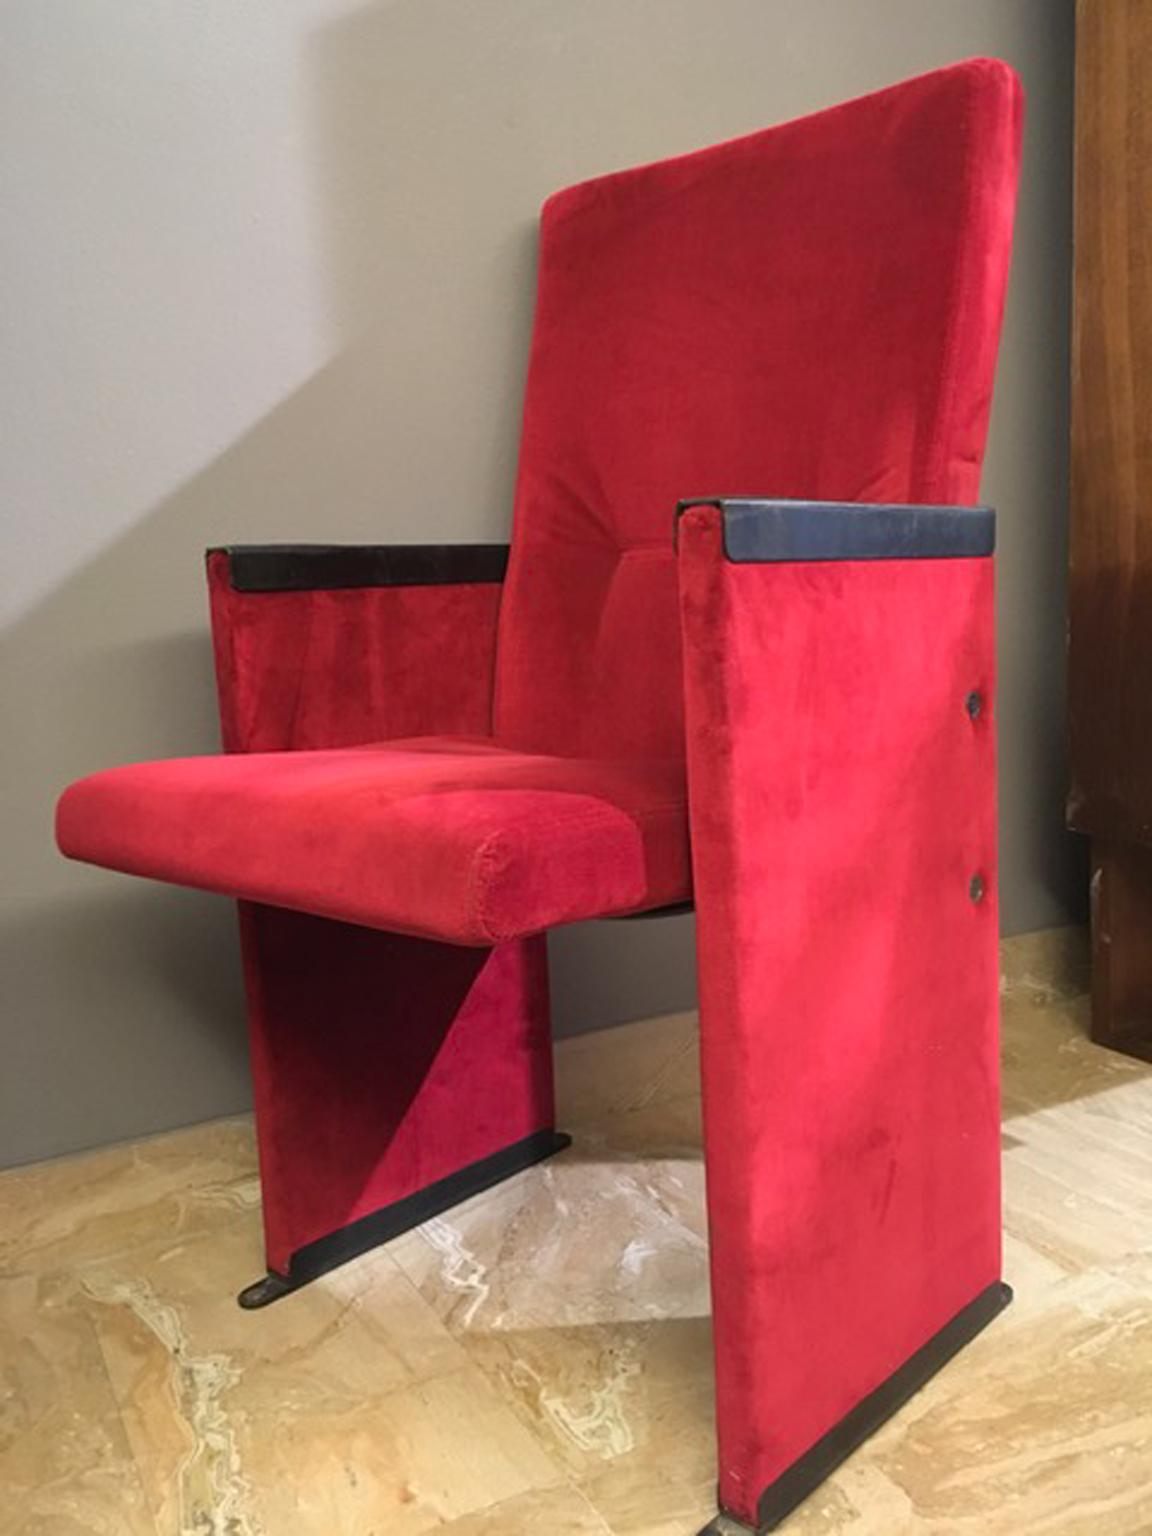 This is a set of Carlo Scarpa armachairs designed and realized for the Auditorium in Rome, project by the Italian architect Marcello Piacentini, built in 1960.
For the interior design project was called Carlo Scarpa.
Every armchairs has its number